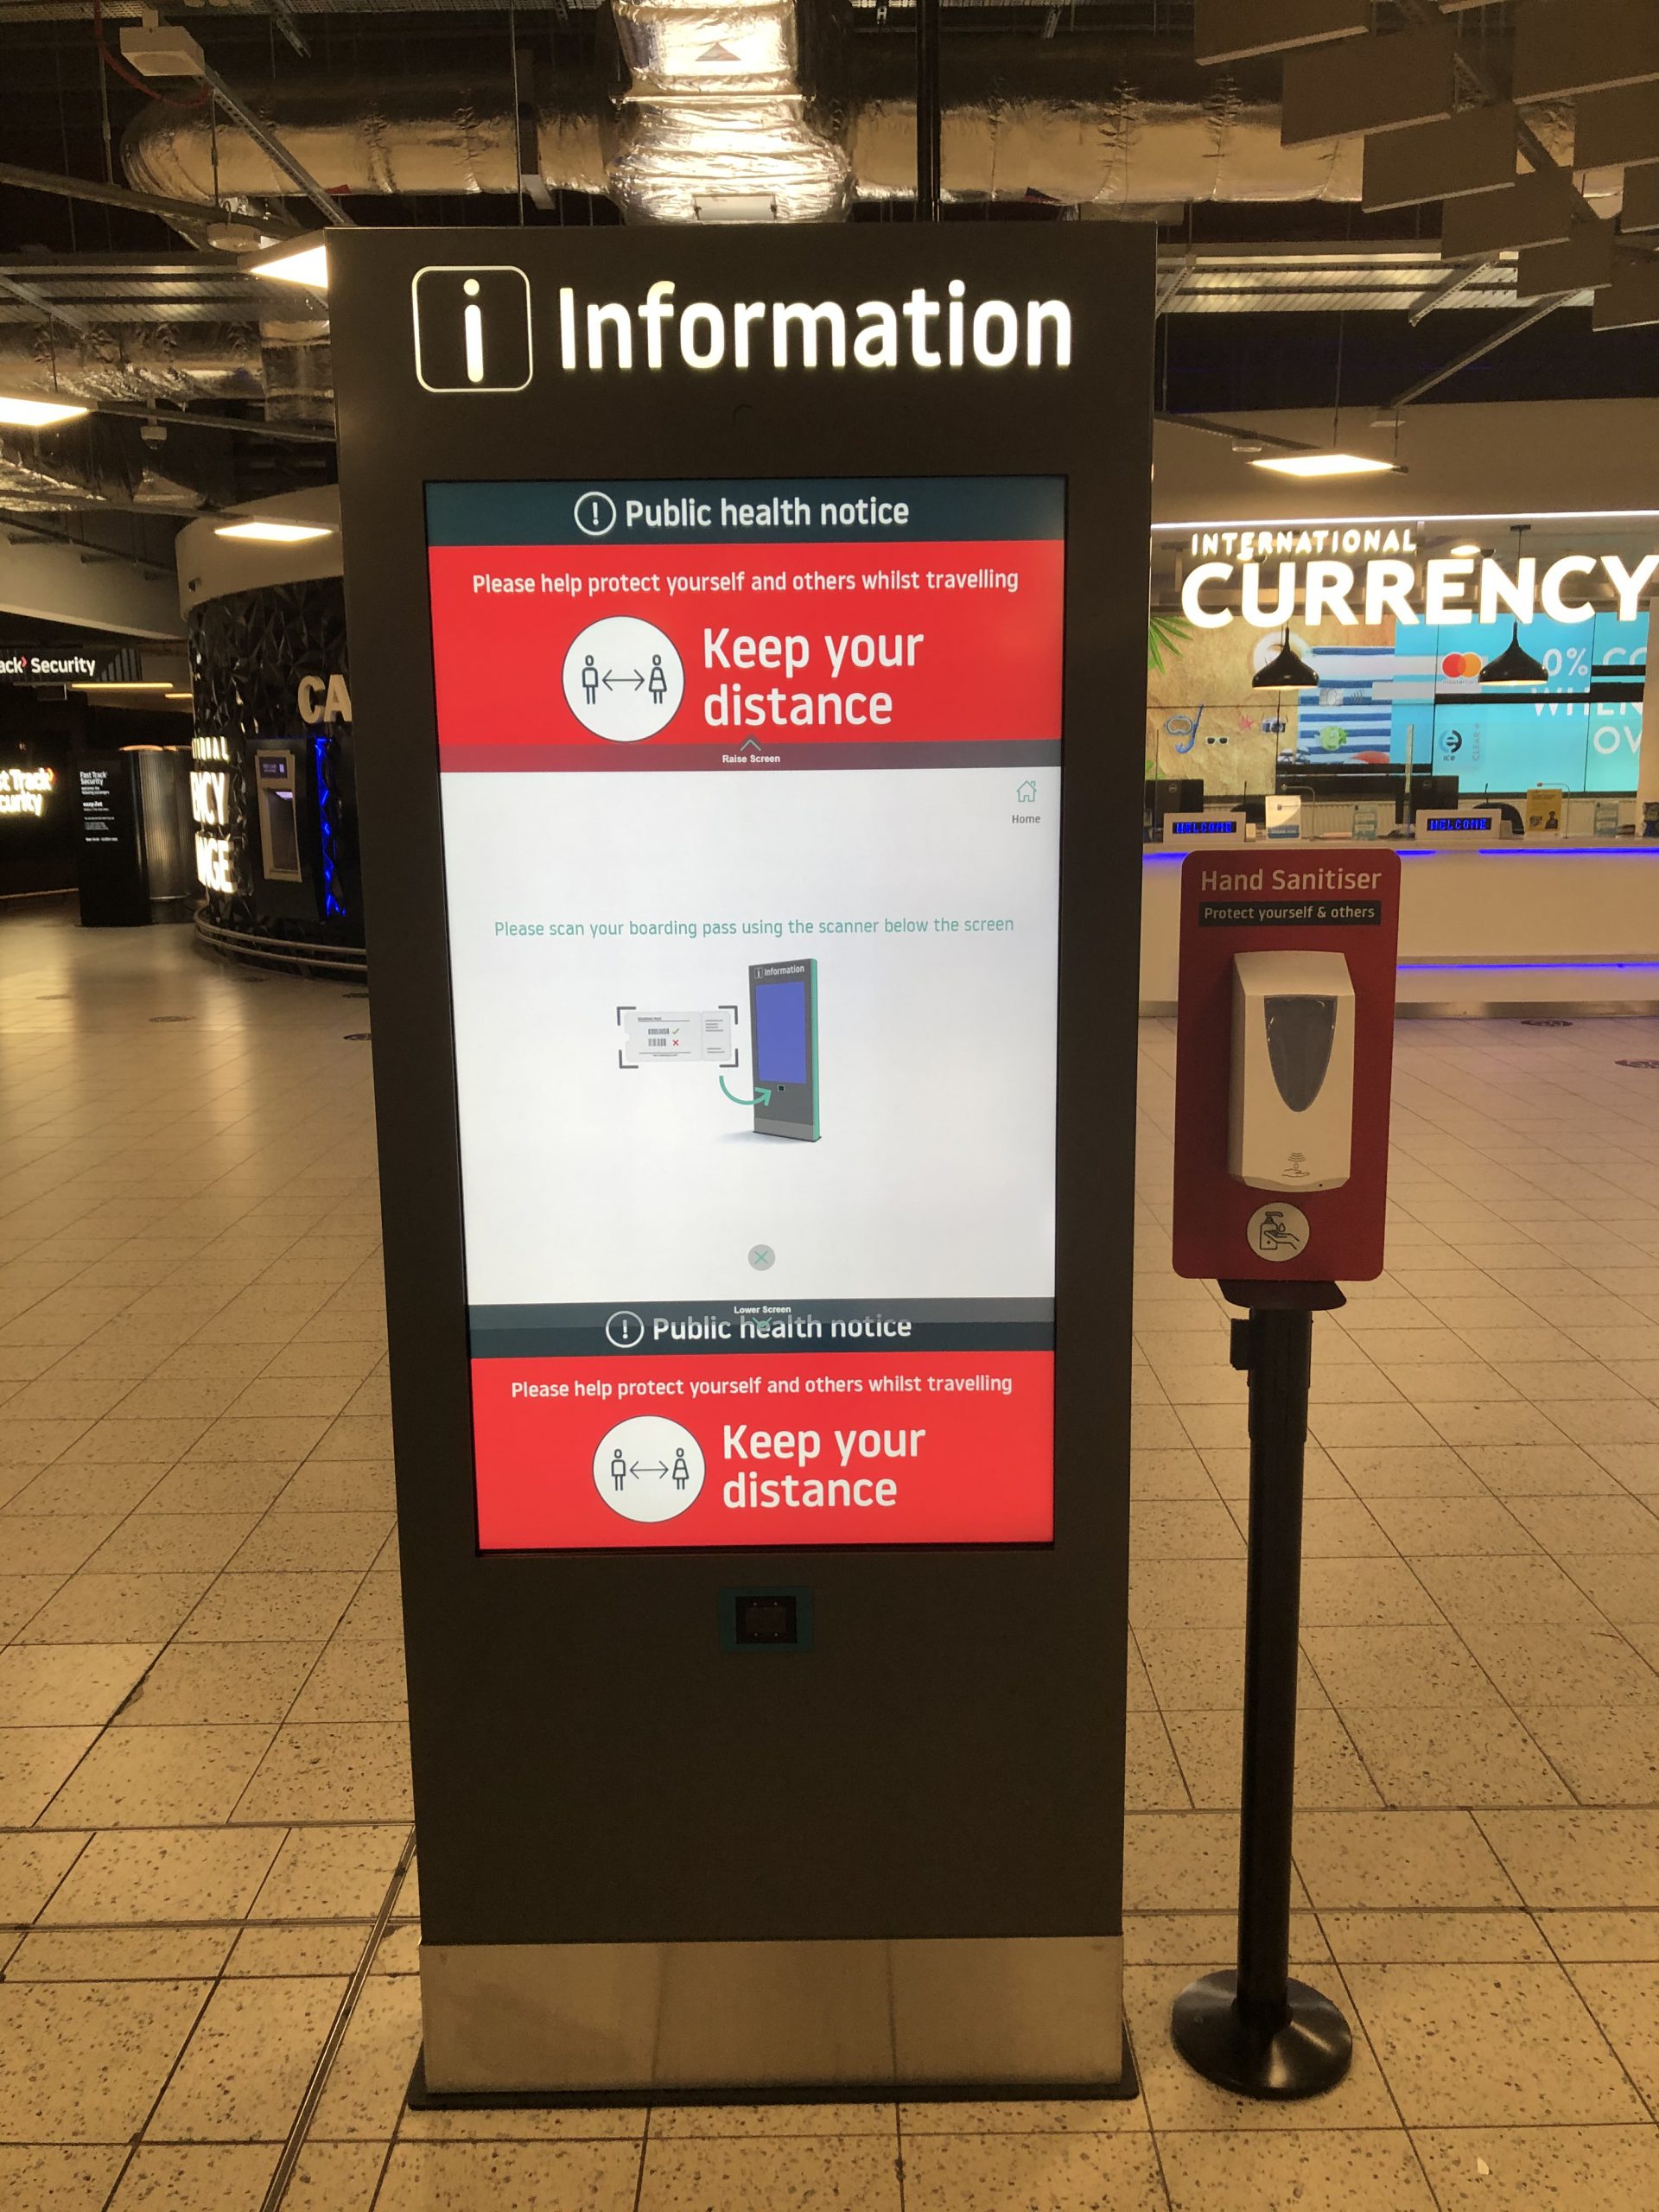 London Luton Airport Wayfinding Information Totem with hand sanitizer stand next to it